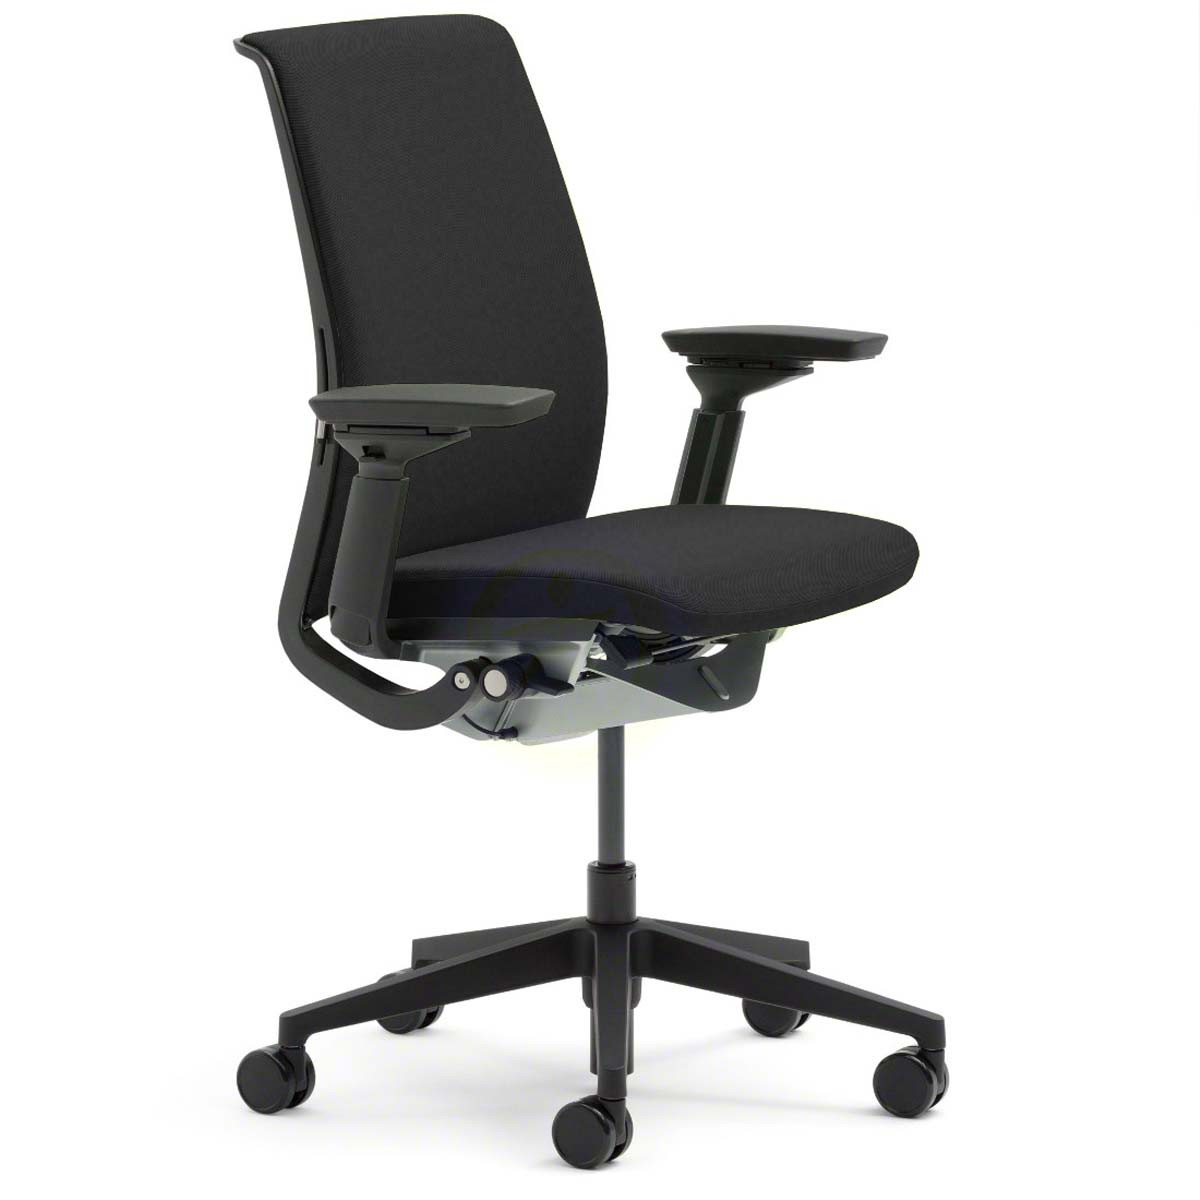 Steelcase Steelcase Think 4D V2 Ergonomic Task Chair Lumbar support £225 